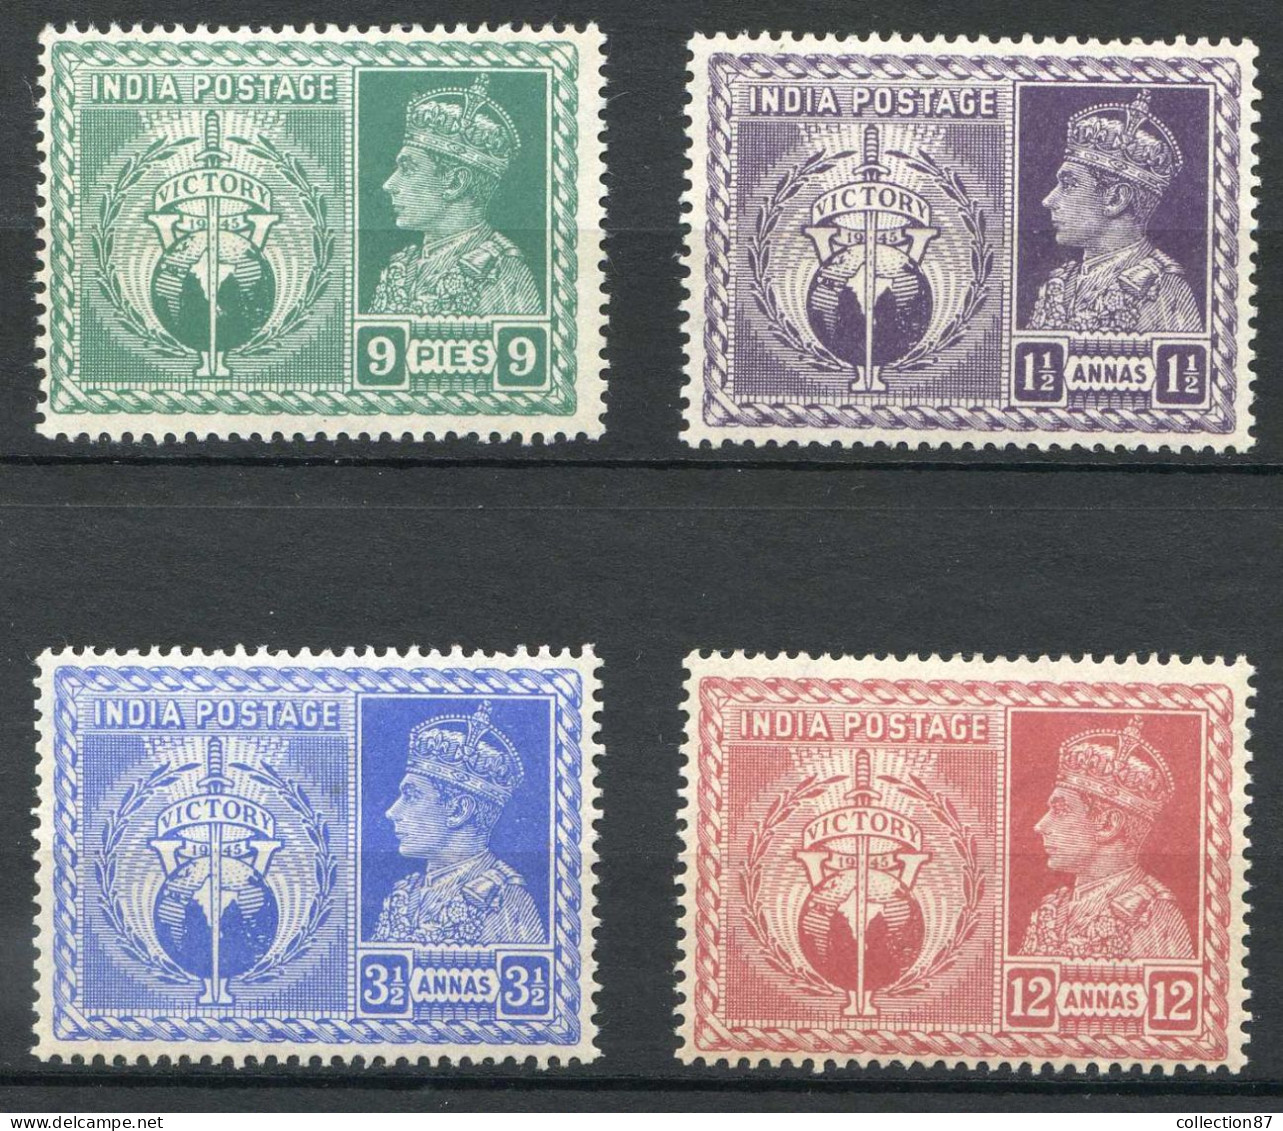 REF 001 > INDE ANGLAISE < N° 174 à 177 * * < Neuf Luxe -- MNH * * -- George VI < Victoire - 1936-47 King George VI